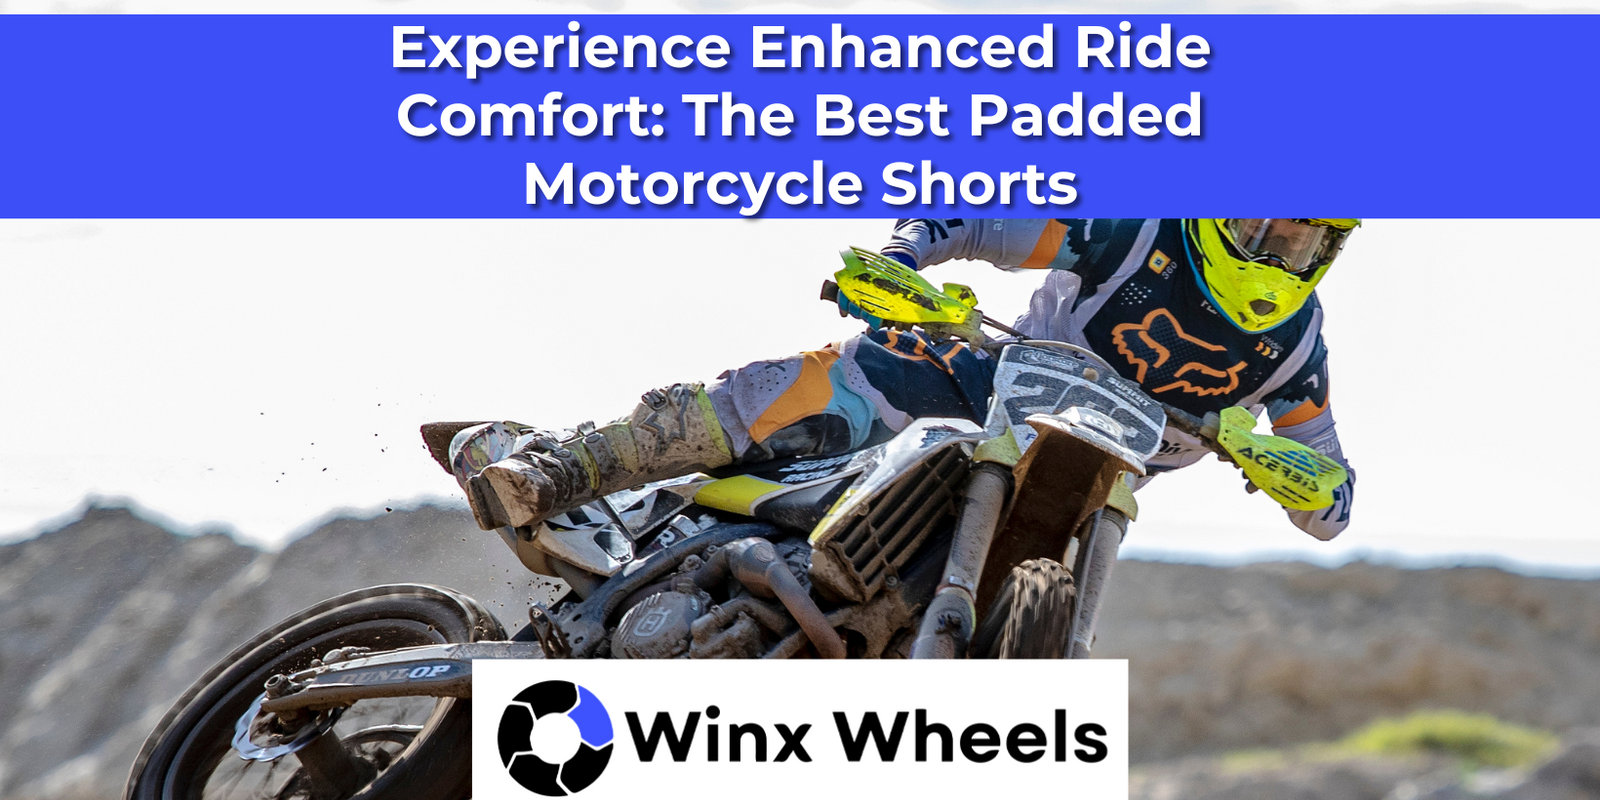 Experience Enhanced Ride Comfort: The Best Padded Motorcycle Shorts